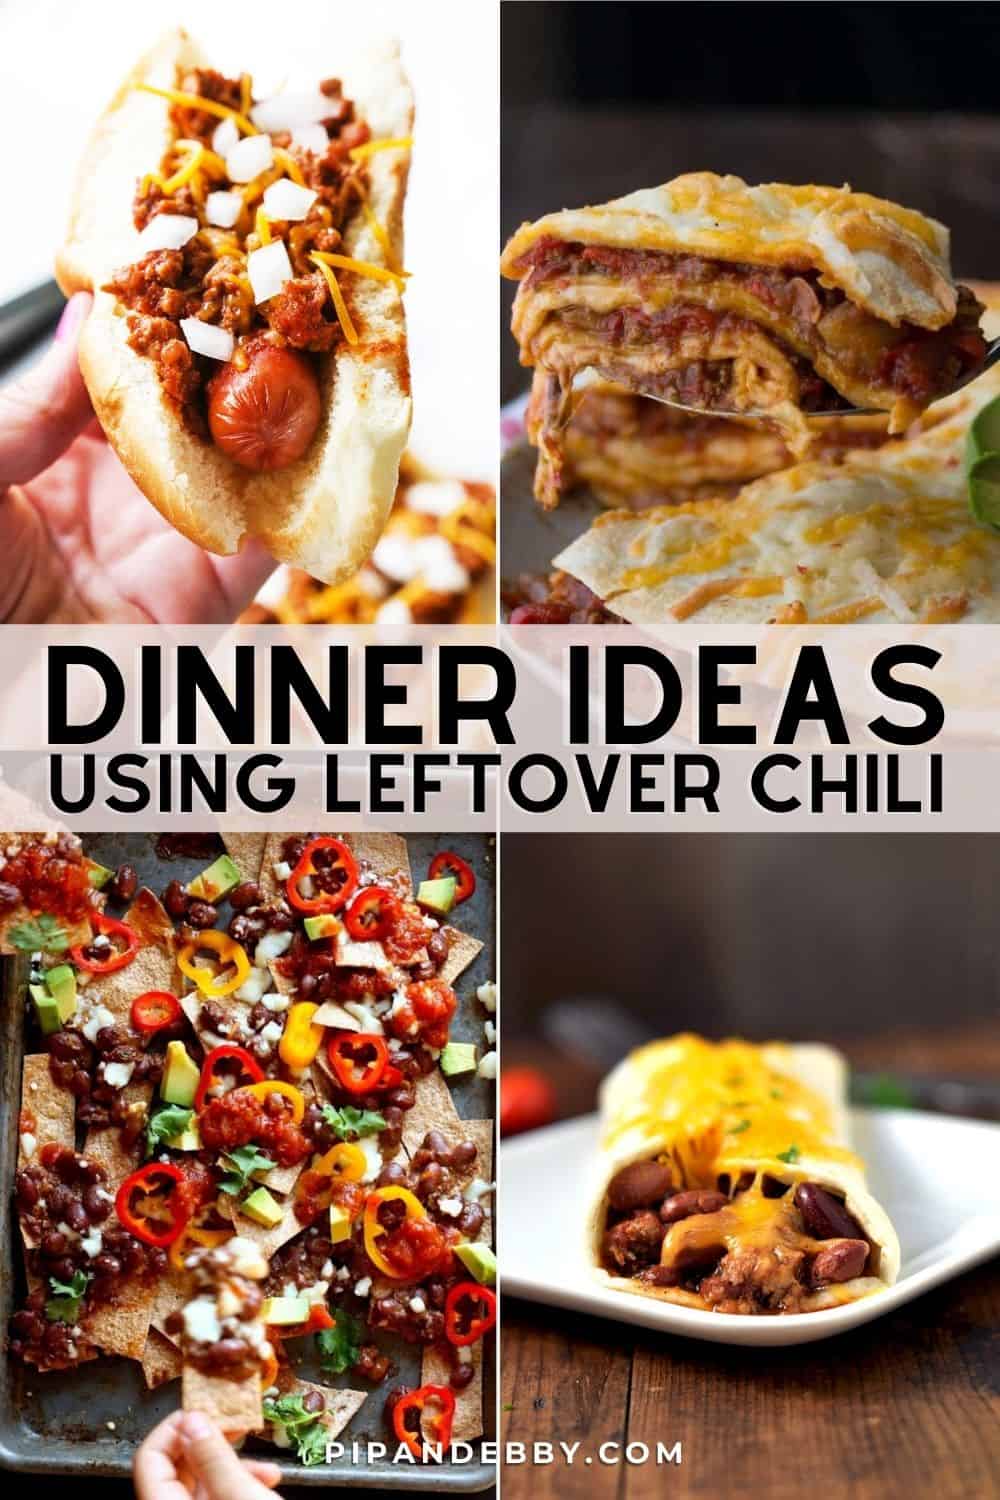 Four chili-related dinners with text overlay reading, "Dinner ideas using leftover chili."